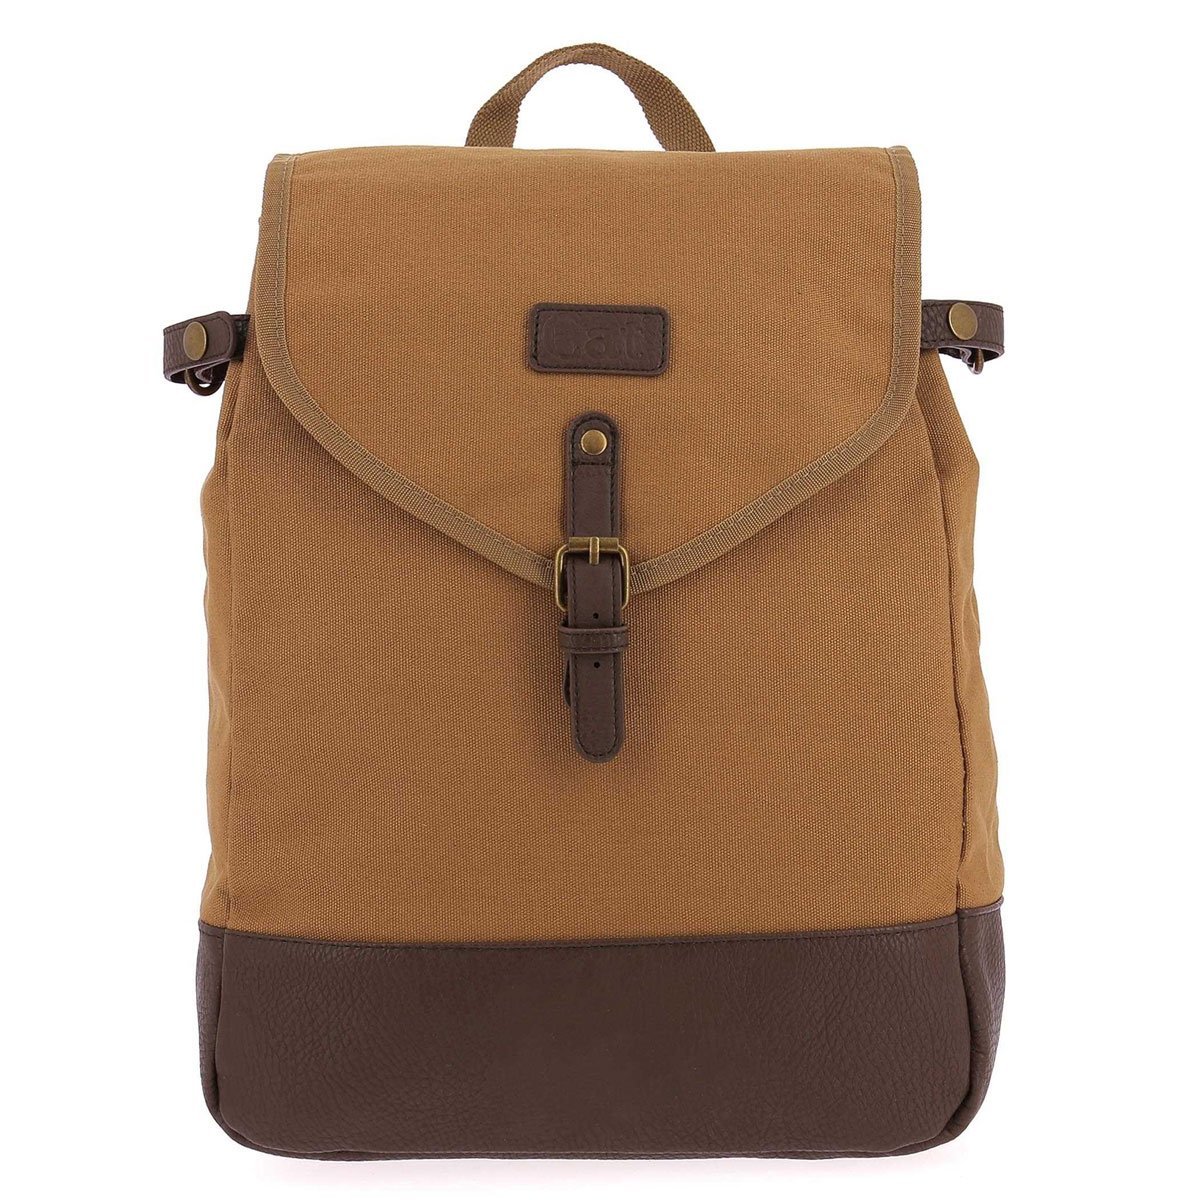 Mochila Tipo Backpack Marble Brown 83473-341 Ct Hb Caterpillar